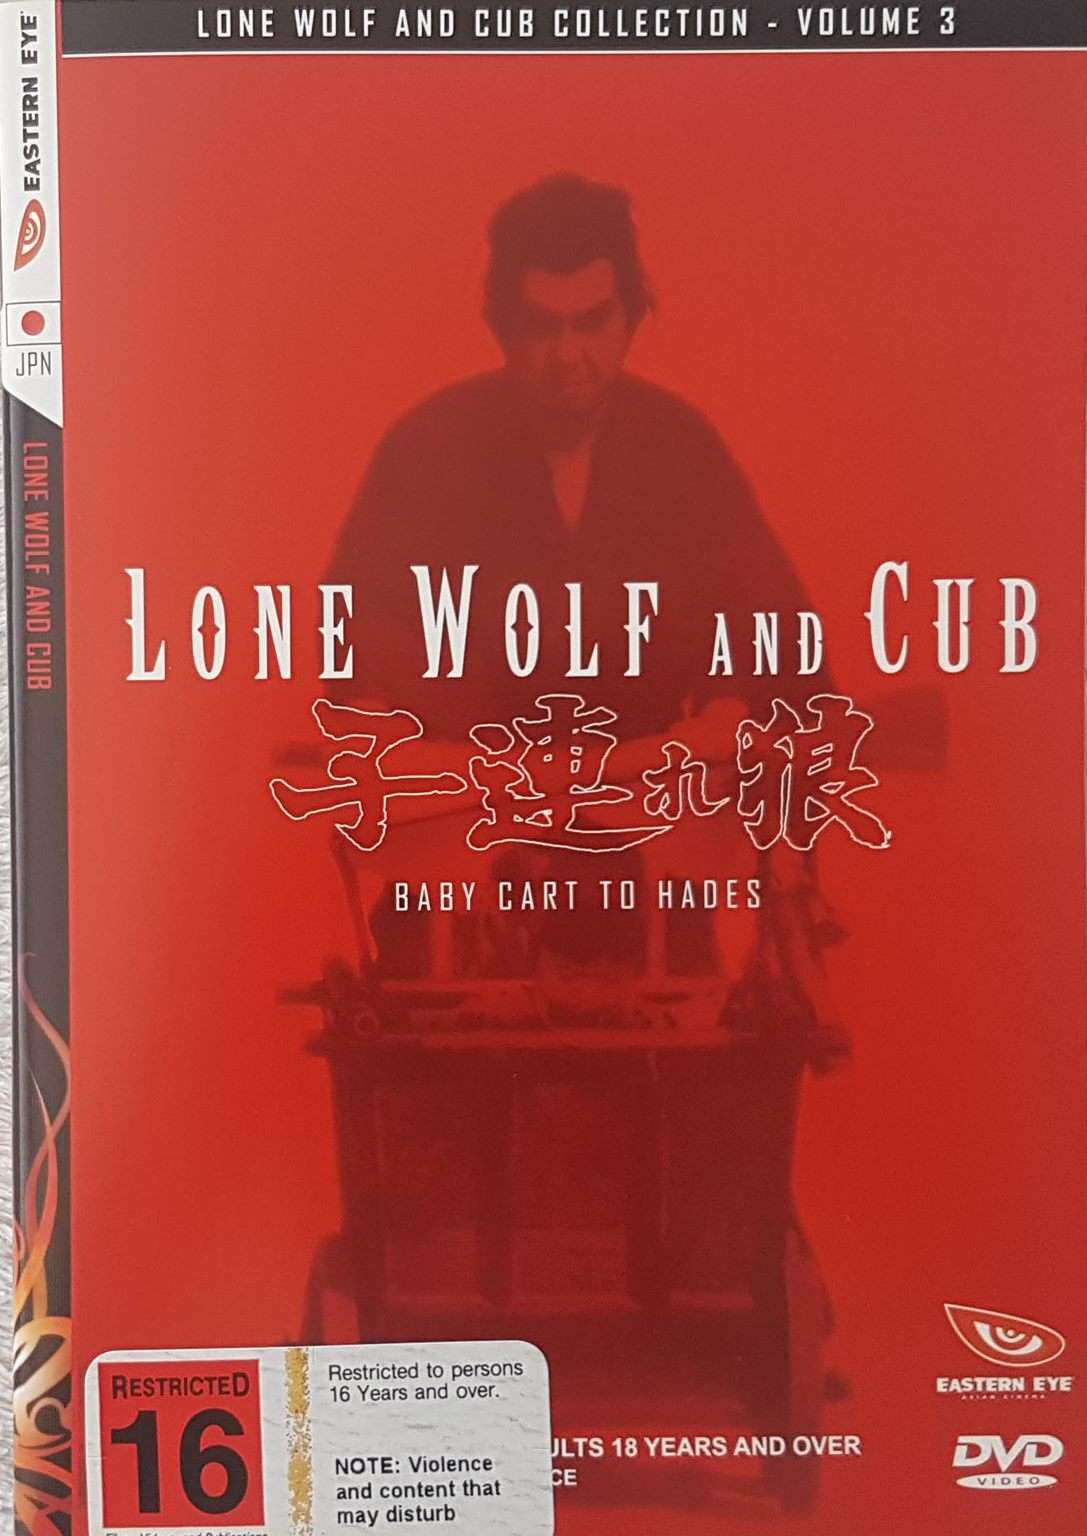 Lone Wolf and Cub: Volume 3 Baby Cart to Hades